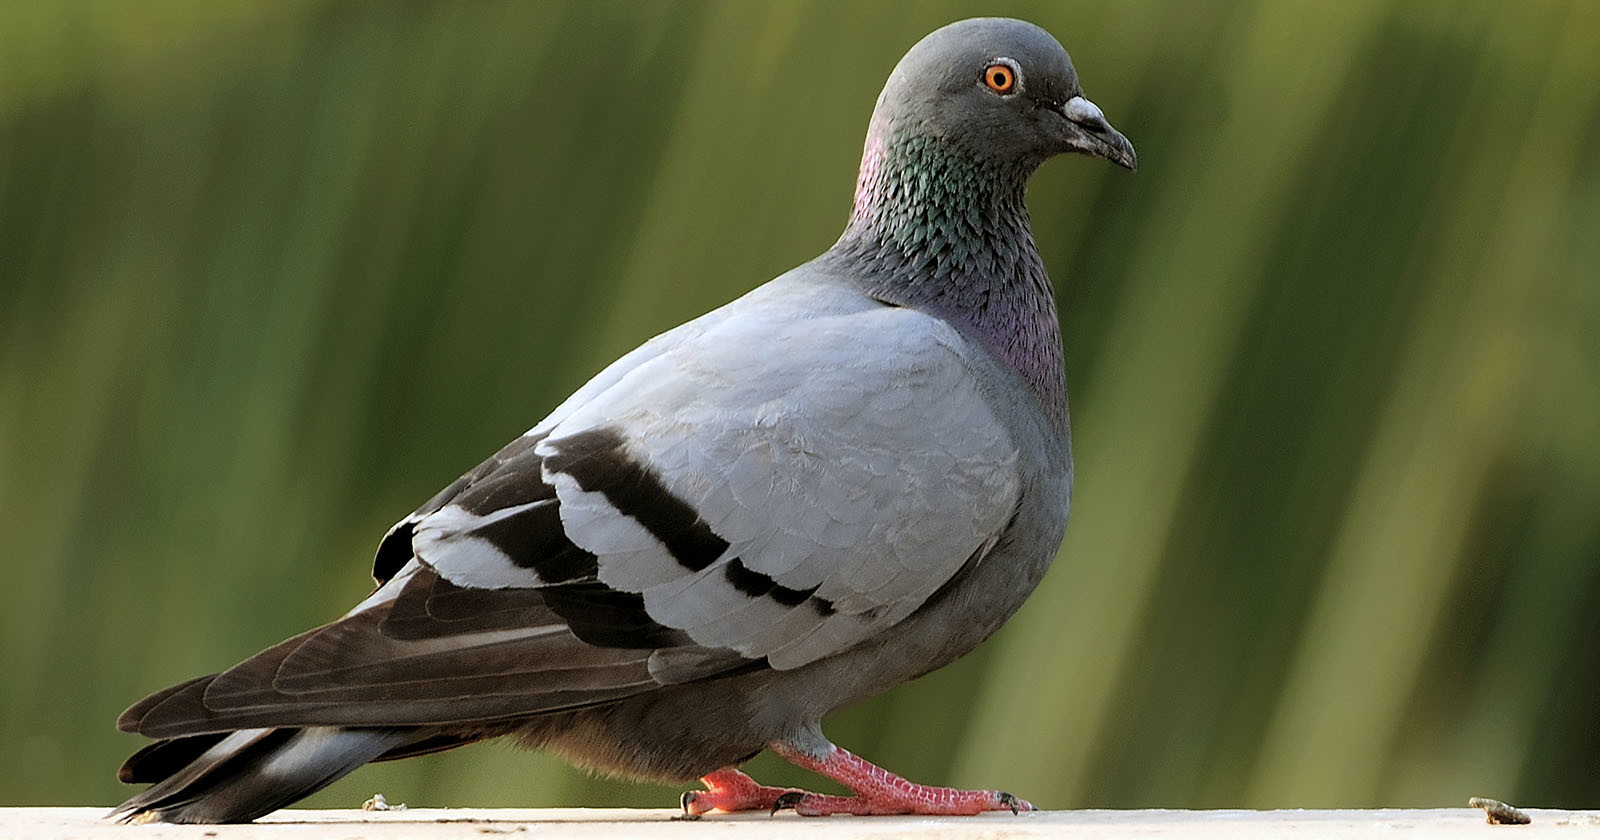  photographer wins million after company used his pigeon 